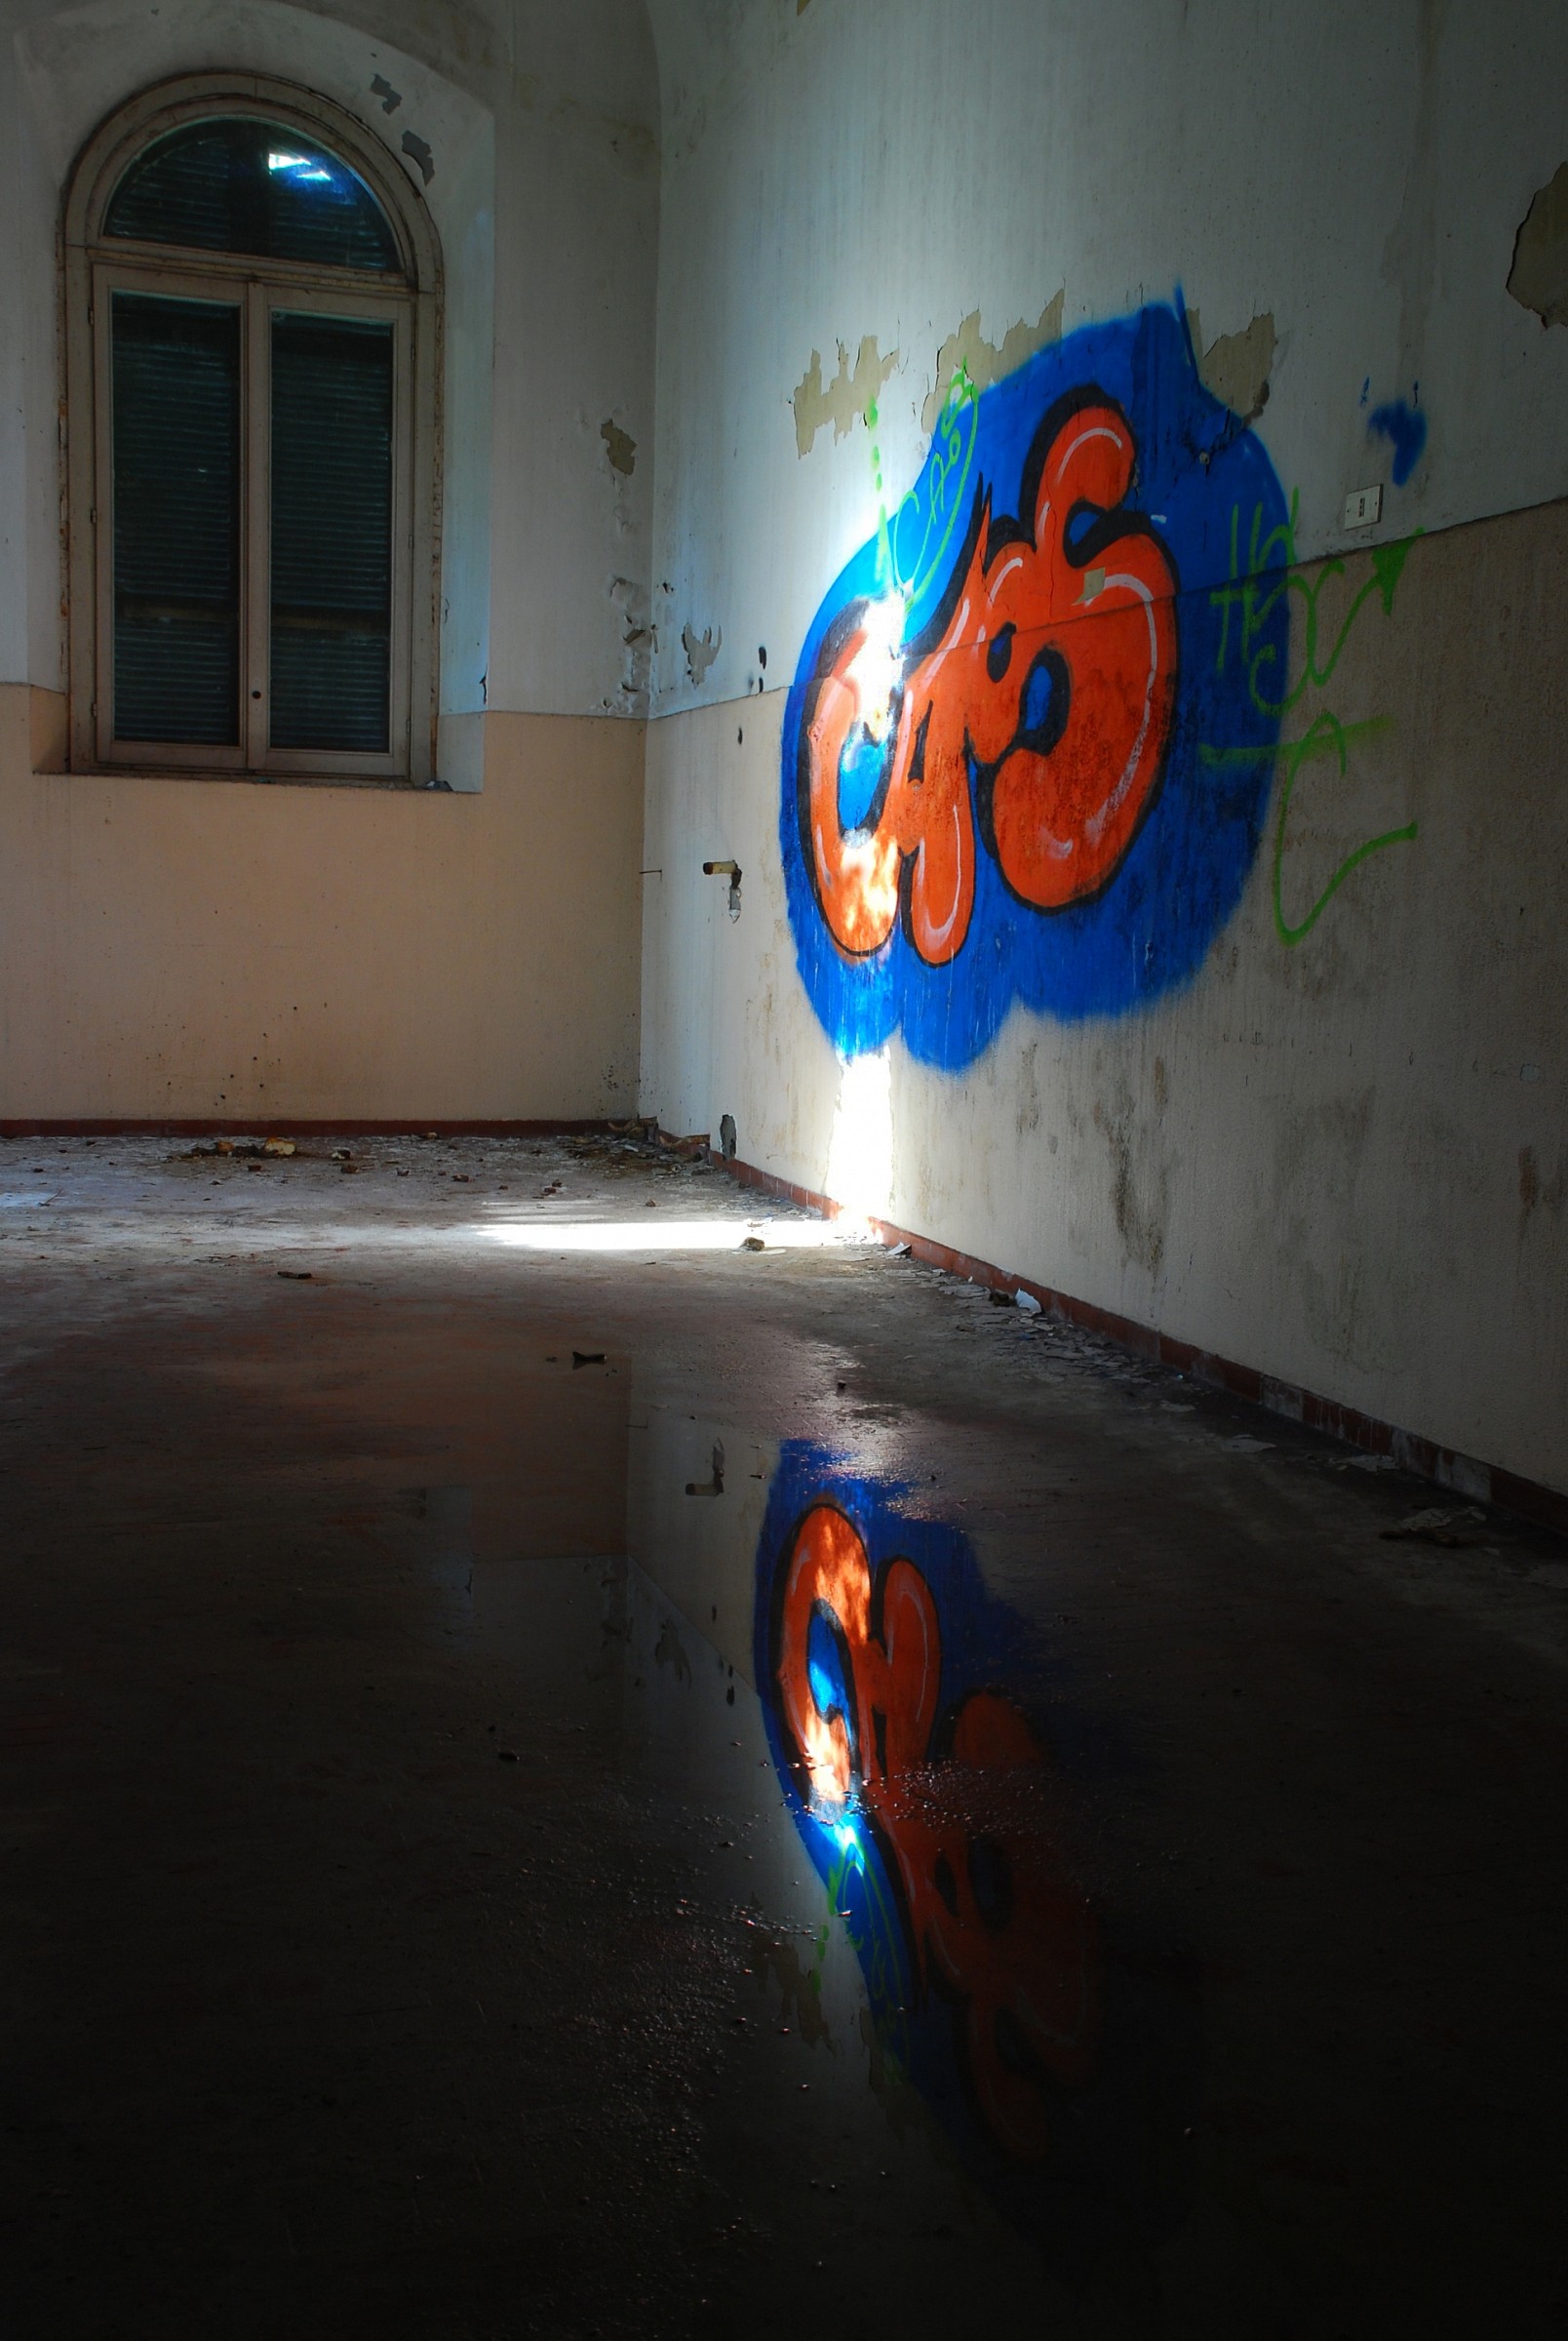 Reflection abandonment in the asylum...